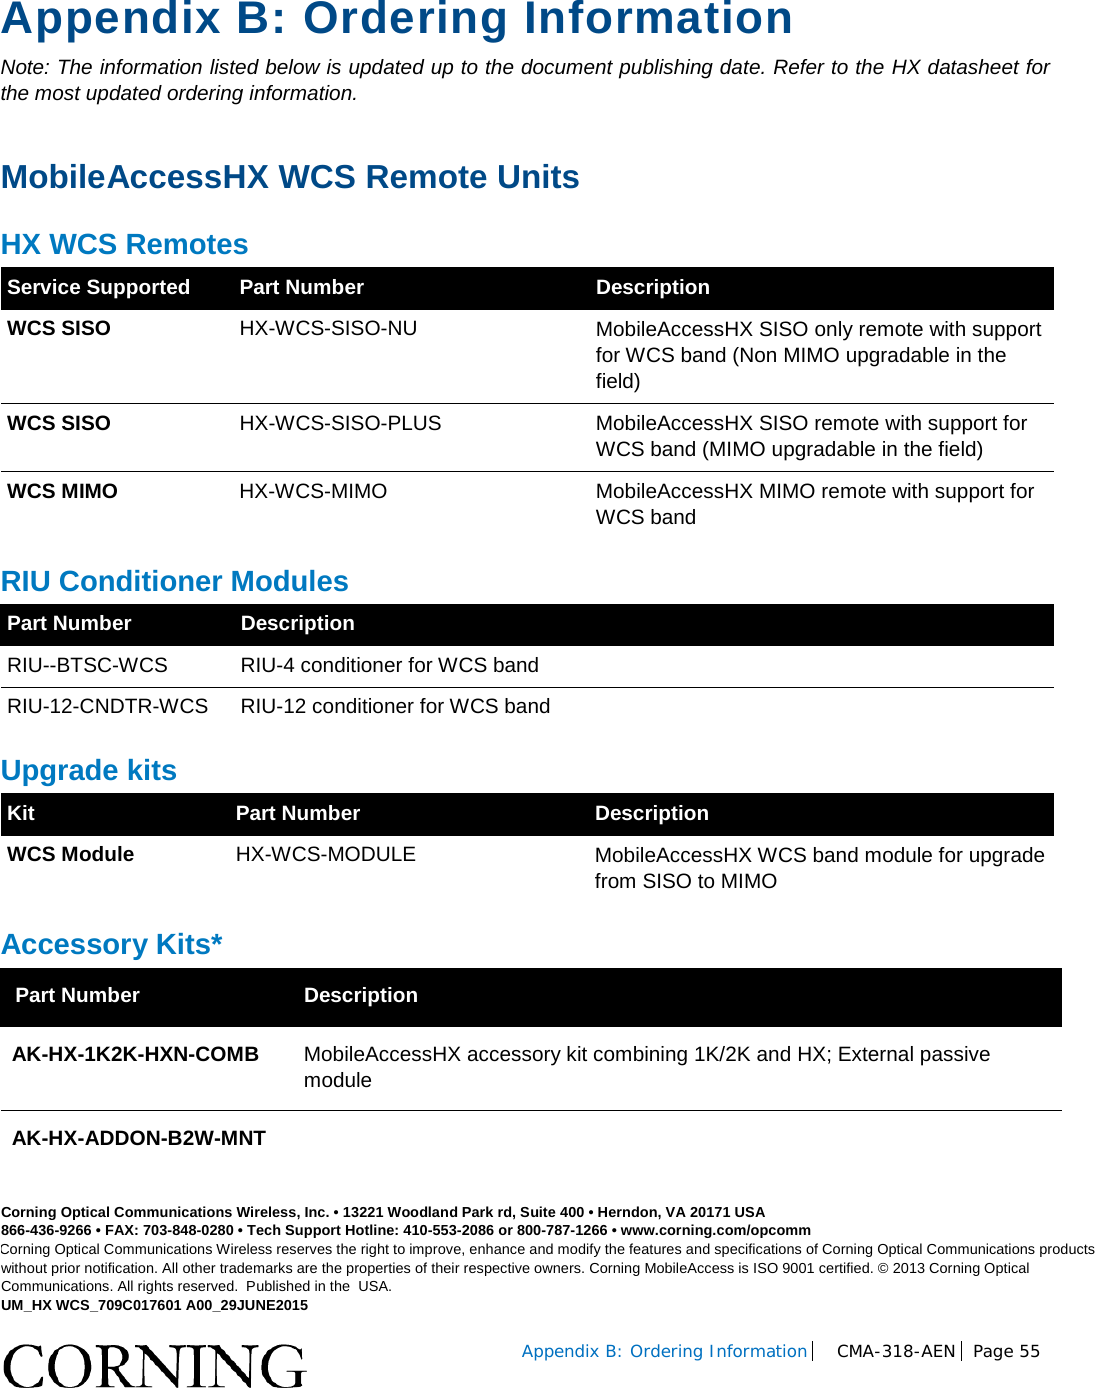   Appendix B: Ordering Information CMA-318-AEN Page 55    Appendix B: Ordering Information Note: The information listed below is updated up to the document publishing date. Refer to the HX datasheet for the most updated ordering information.  MobileAccessHX WCS Remote Units HX WCS Remotes Service Supported Part Number Description WCS SISO HX-WCS-SISO-NU MobileAccessHX SISO only remote with support for WCS band (Non MIMO upgradable in the field) WCS SISO HX-WCS-SISO-PLUS MobileAccessHX SISO remote with support for WCS band (MIMO upgradable in the field) WCS MIMO HX-WCS-MIMO MobileAccessHX MIMO remote with support for WCS band RIU Conditioner Modules Part Number Description RIU--BTSC-WCS RIU-4 conditioner for WCS band RIU-12-CNDTR-WCS RIU-12 conditioner for WCS band Upgrade kits Kit Part Number Description WCS Module HX-WCS-MODULE MobileAccessHX WCS band module for upgrade from SISO to MIMO Accessory Kits* Part Number Description AK-HX-1K2K-HXN-COMB MobileAccessHX accessory kit combining 1K/2K and HX; External passive module AK-HX-ADDON-B2W-MNT   Corning Optical Communications Wireless, Inc. • 13221 Woodland Park rd, Suite 400 • Herndon, VA 20171 USA 866-436-9266 • FAX: 703-848-0280 • Tech Support Hotline: 410-553-2086 or 800-787-1266 • www.corning.com/opcomm Corning Optical Communications Wireless reserves the right to improve, enhance and modify the features and specifications of Corning Optical Communications products without prior notification. All other trademarks are the properties of their respective owners. Corning MobileAccess is ISO 9001 certified. © 2013 Corning Optical Communications. All rights reserved.  Published in the  USA.  UM_HX WCS_709C017601 A00_29JUNE2015 